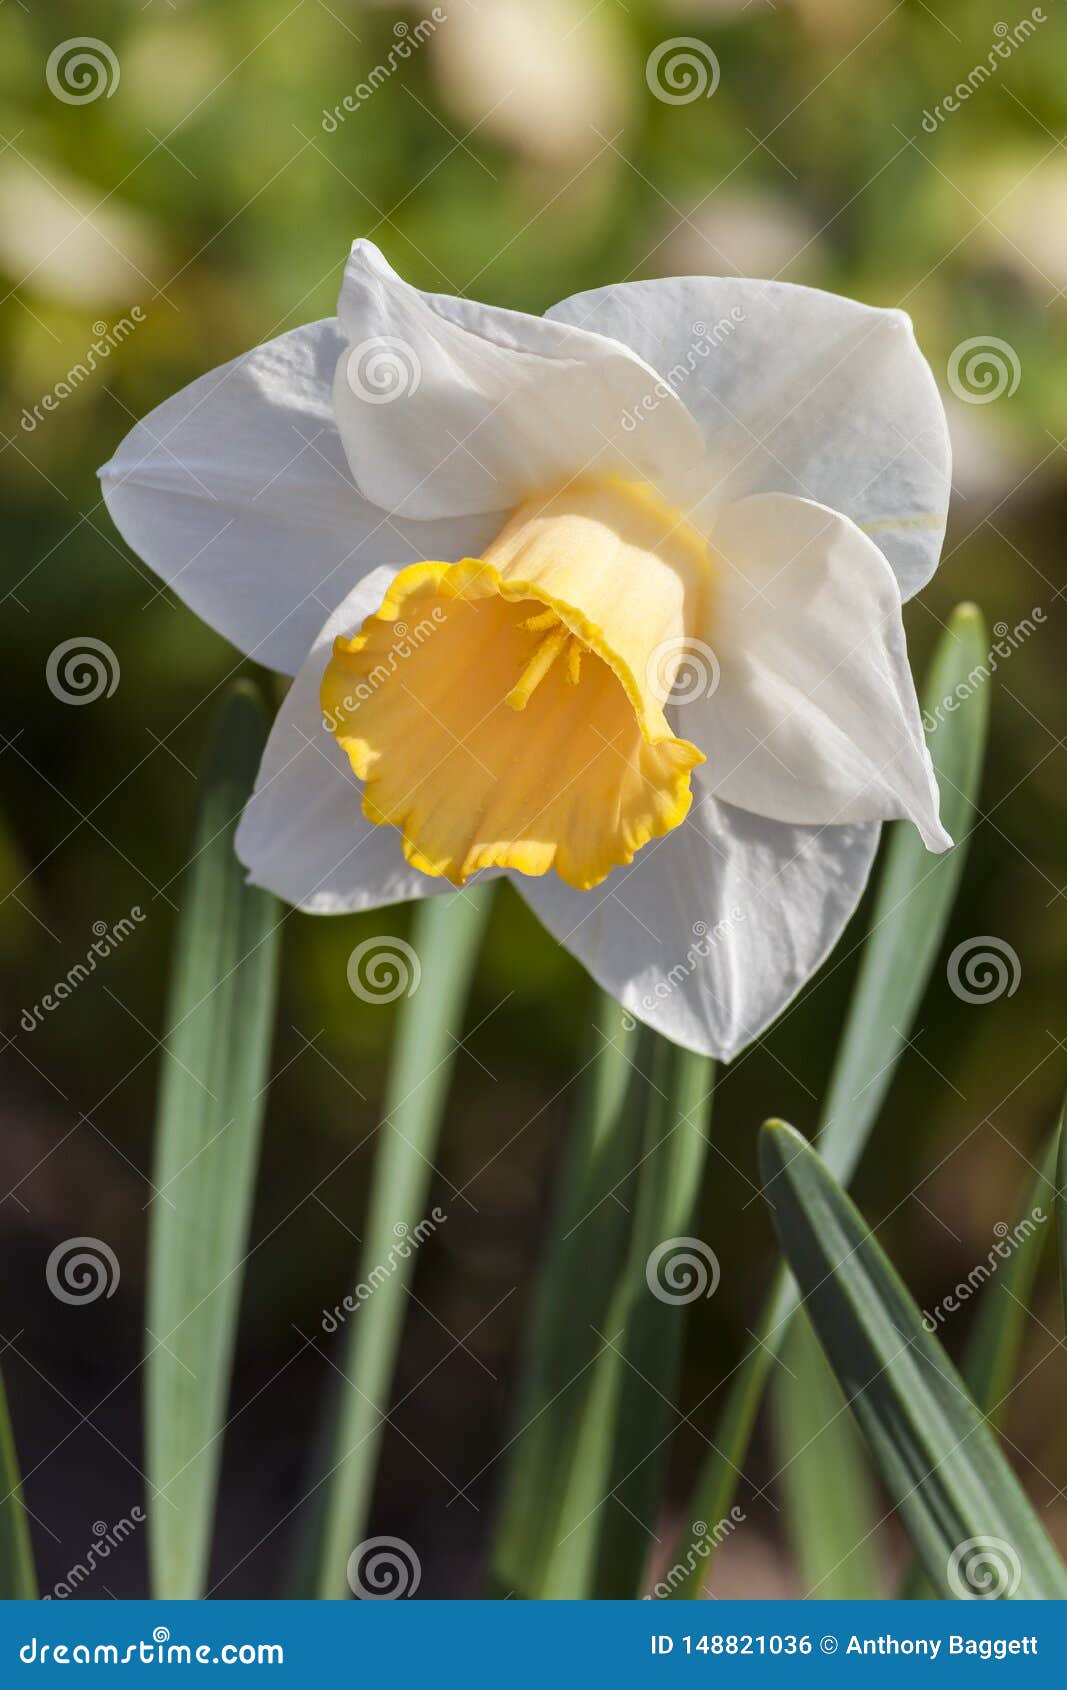 daffodil narcissus `foresight`